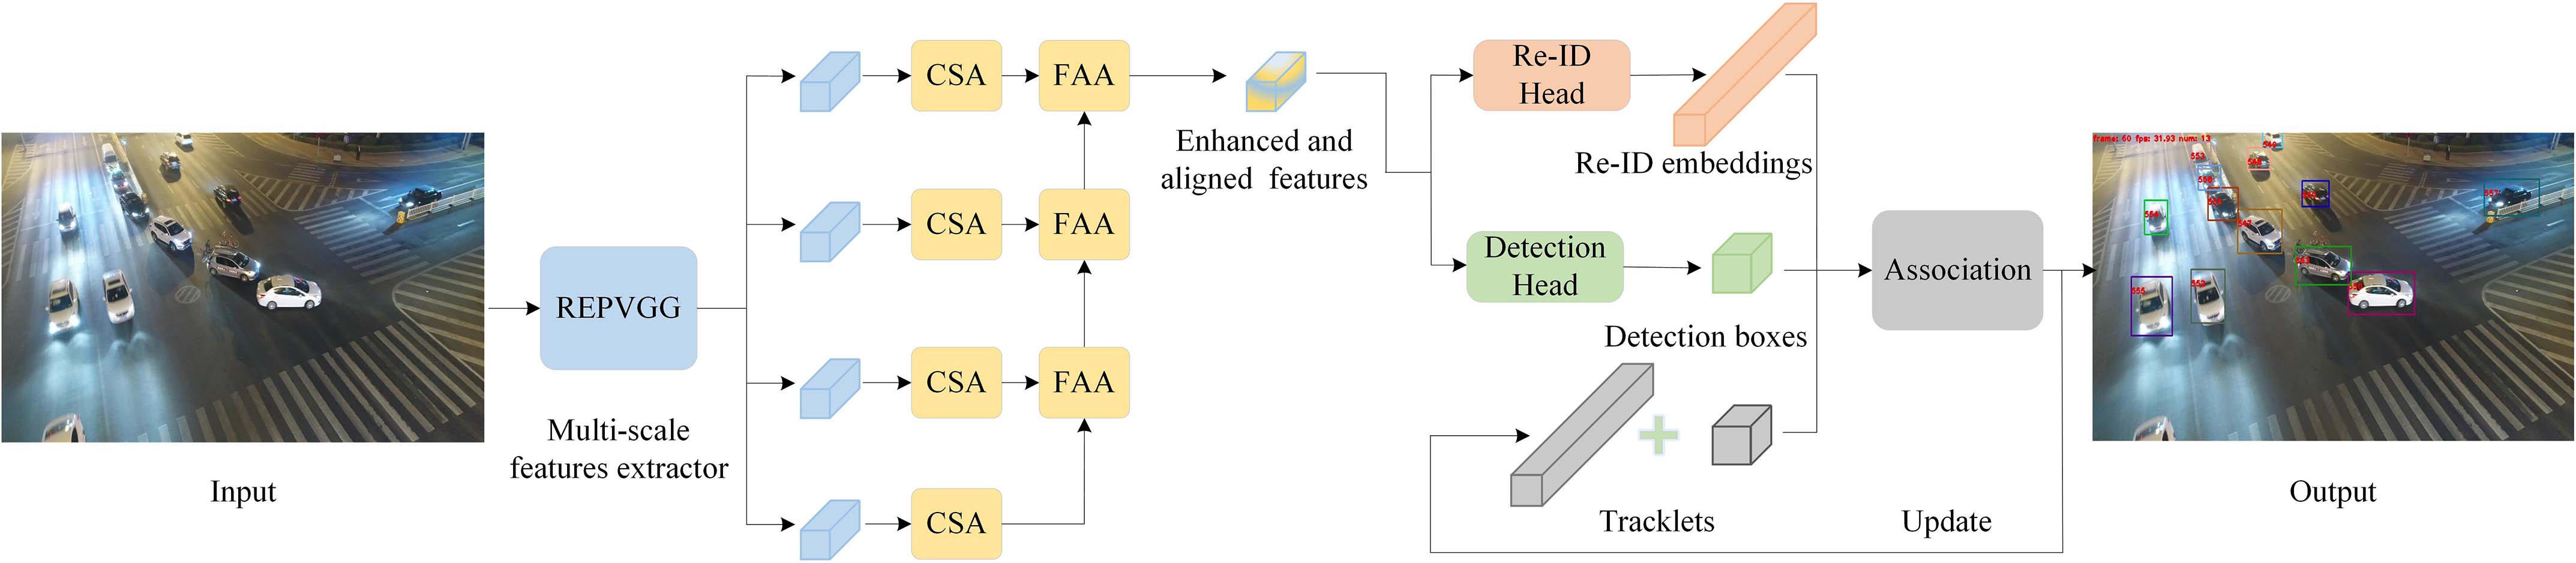 Architecture of our tracker FAANet tracking framework. This framework contains four components: backbone (RepVGG), neck (CSA + FAA), head (Re-ID + detection), and association.